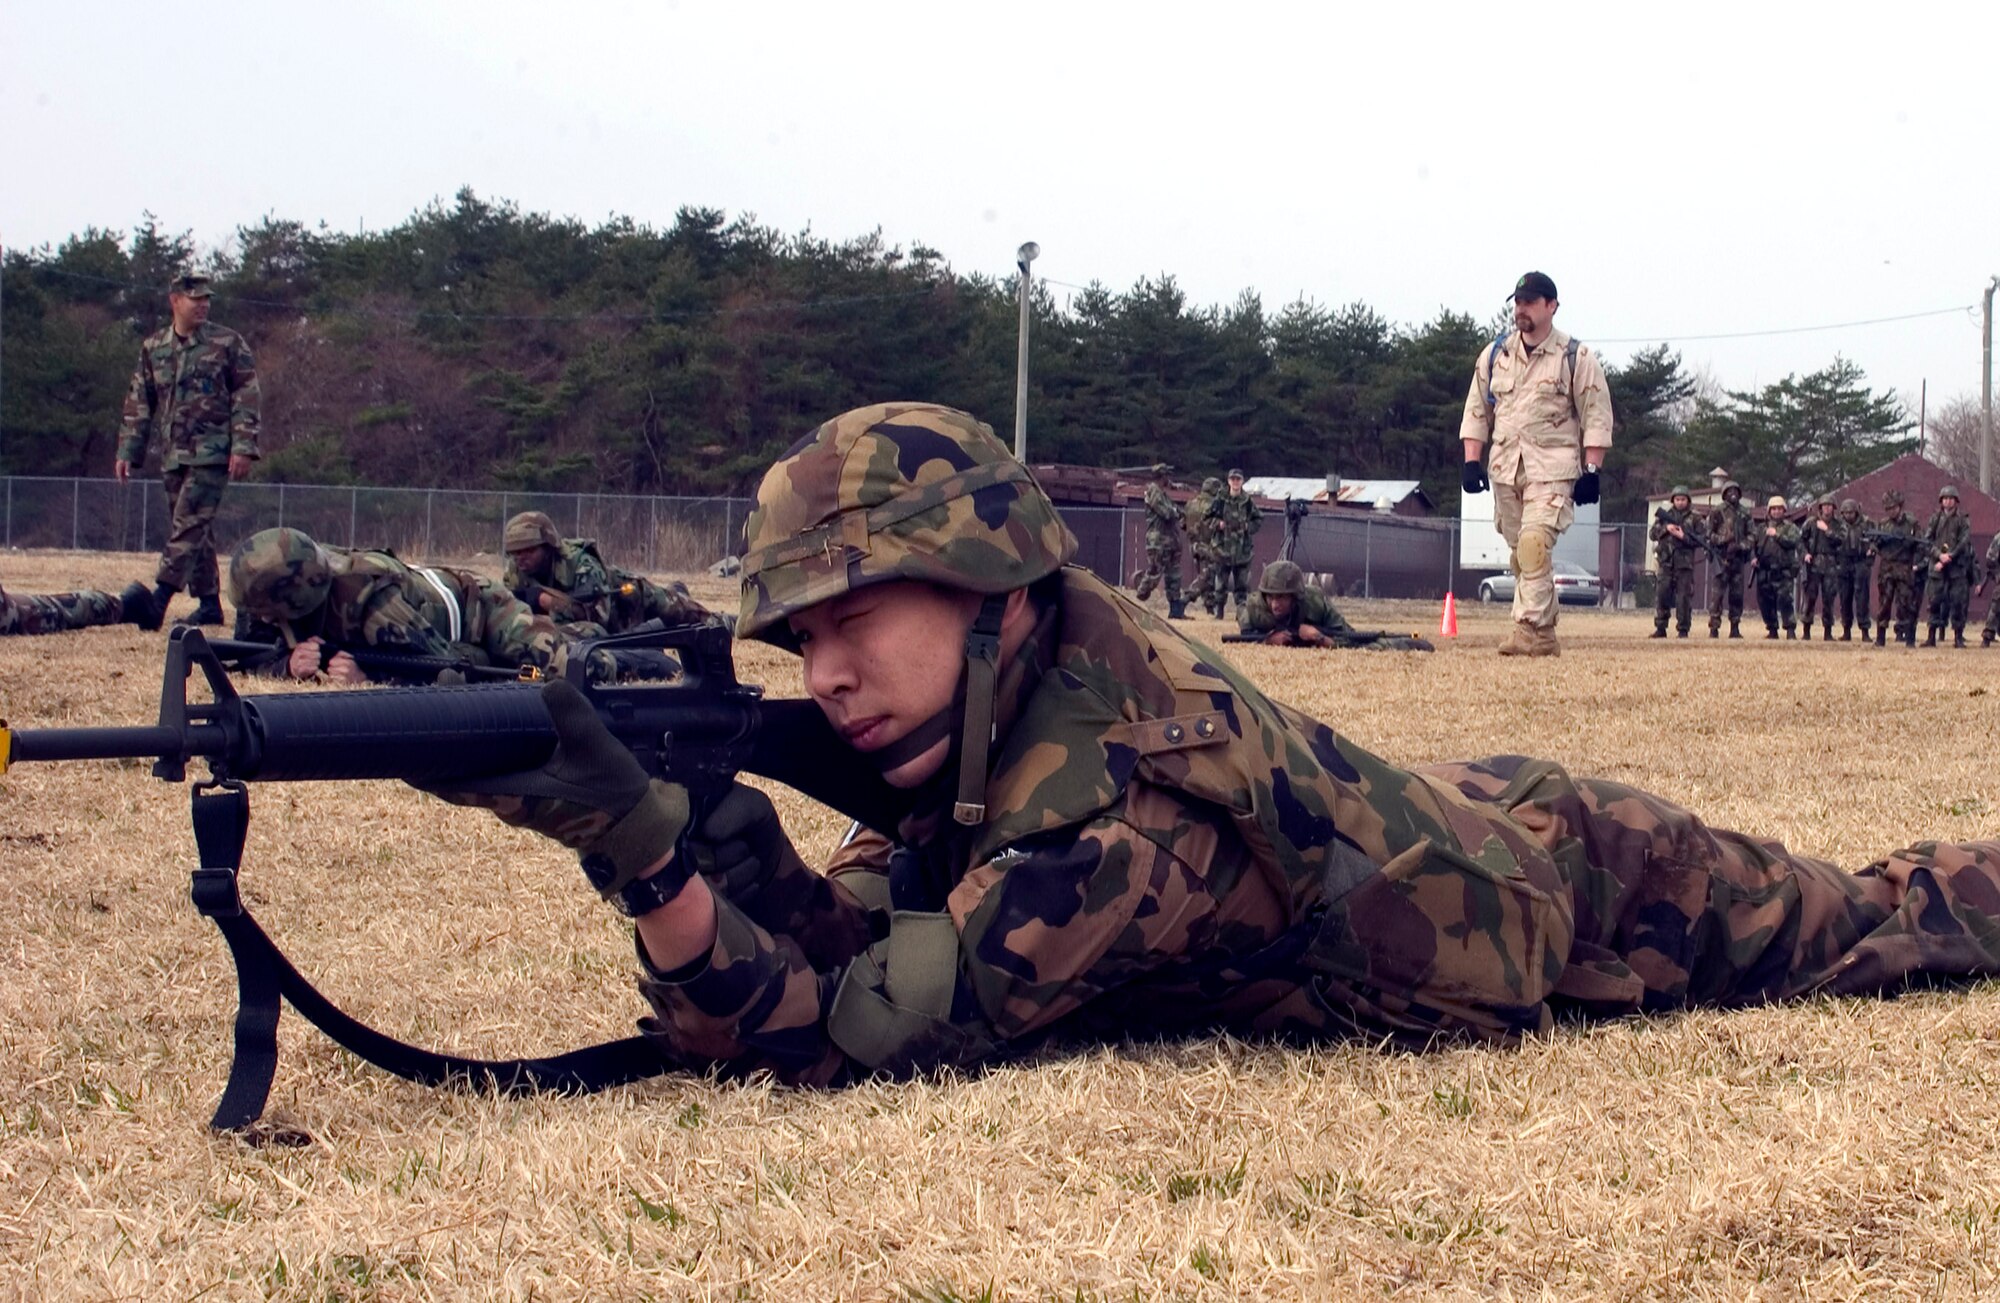 Senior Airman Takao Itoh, a student in the Expeditionary Combat Skills Training, assumes a prone firing position after a high crawl maneuver at Camp Defender on Misawa Air Base, Japan. The ECST course held April 23 to 25 is designed to prepare Airmen for deployment. Airman Itoh is a member of the Japan Air Self-Defense Force. (U.S. Air Force photo/Airman 1st Class Eric Harris) 